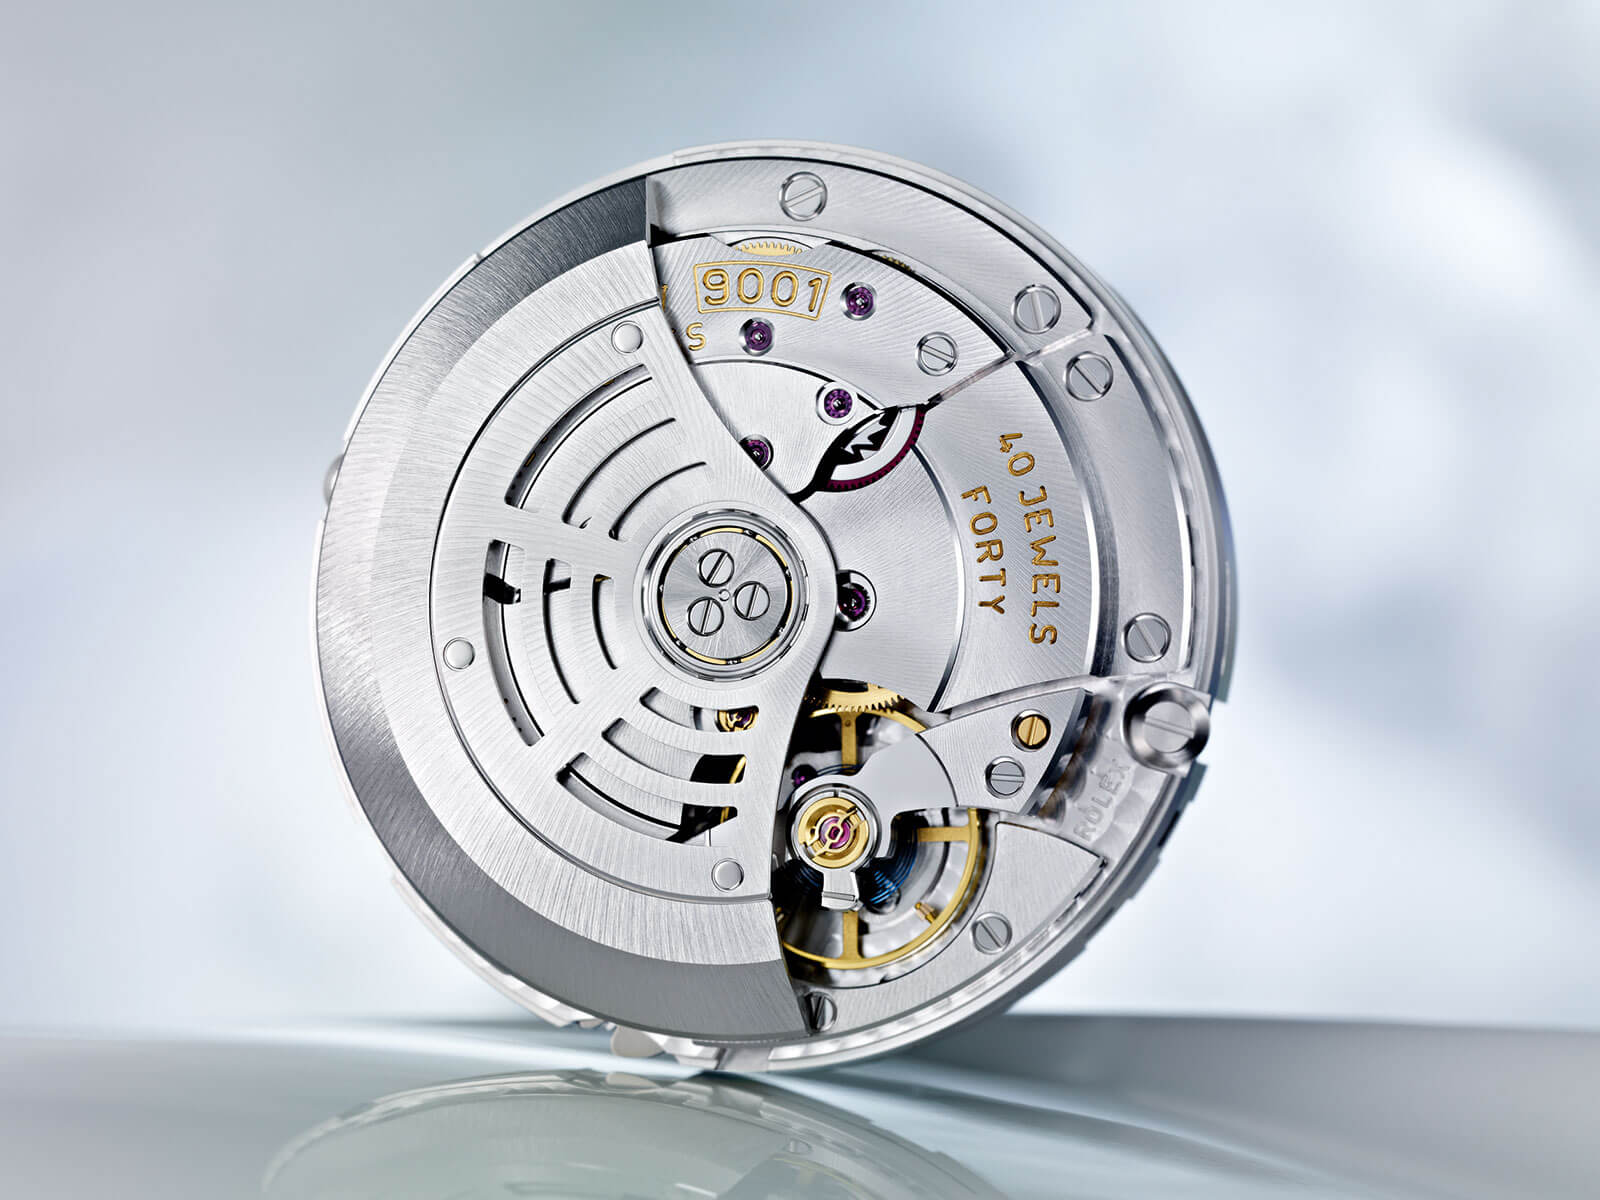 Rolex Sky-Dweller 326238 Rolex Calibre 9001 Automatic Movement with Power Reserve of 72 Hours